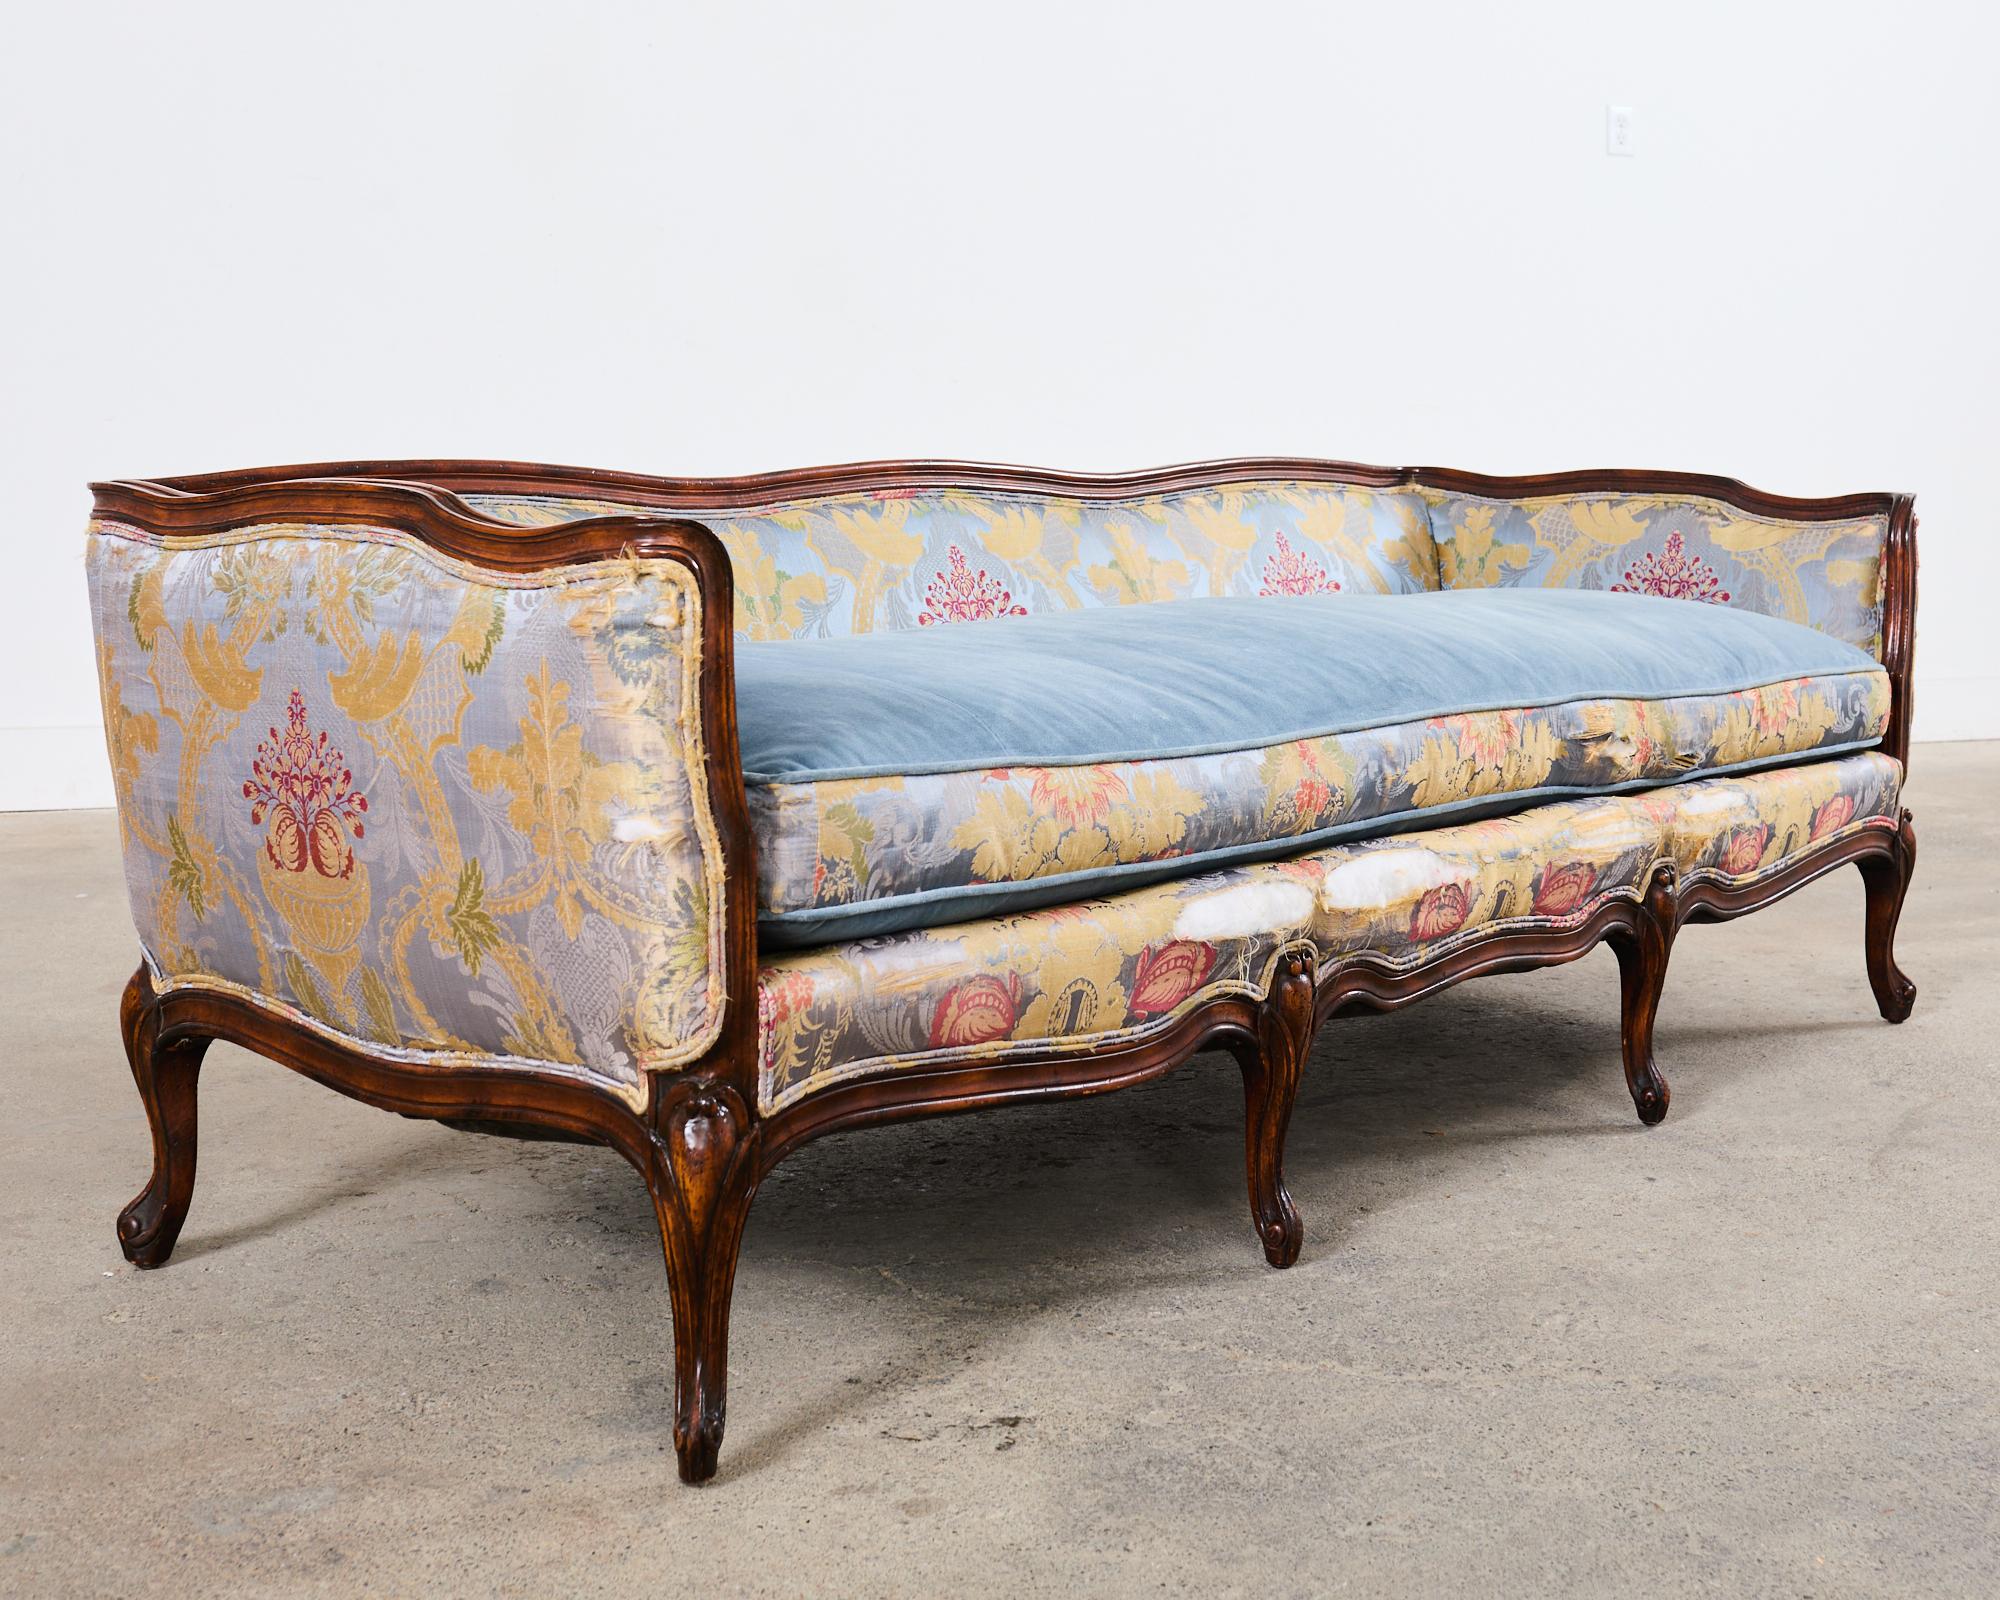 Gorgeous country French provincial canape sofa or settee made in the Louis XV taste. The sofa features a beechwood low profile carved frame with a serpentine back, arms, and apron. The settee has vintage upholstery fabric that is worn with losses